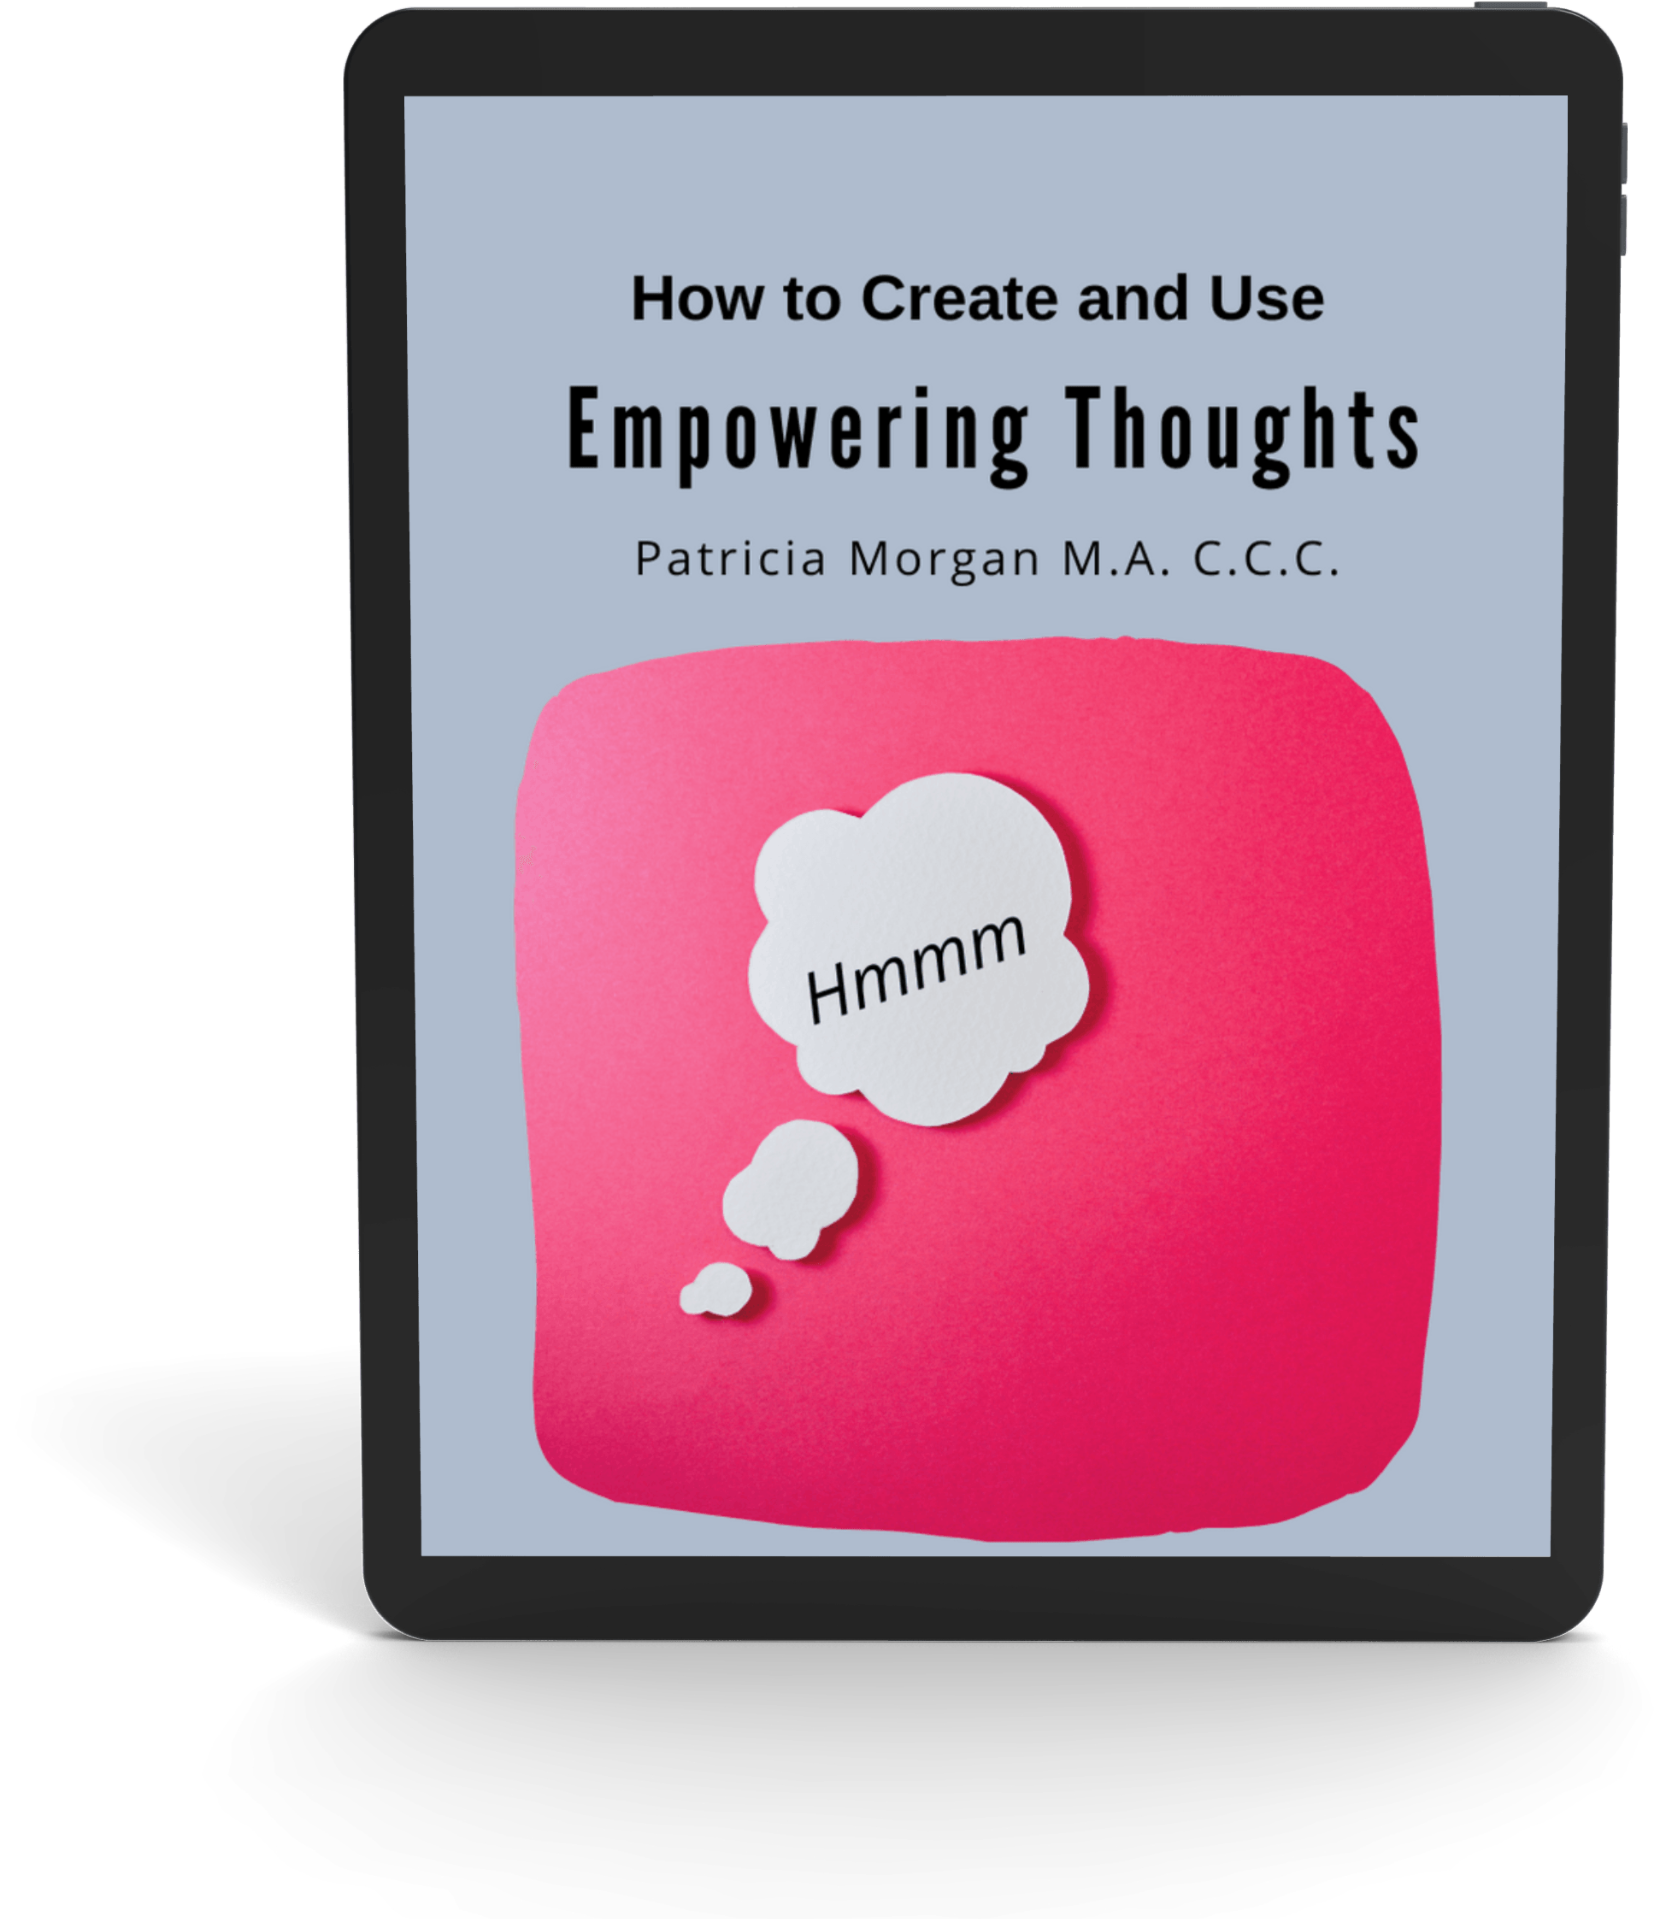 How to Create and Use Empowering Thoughts